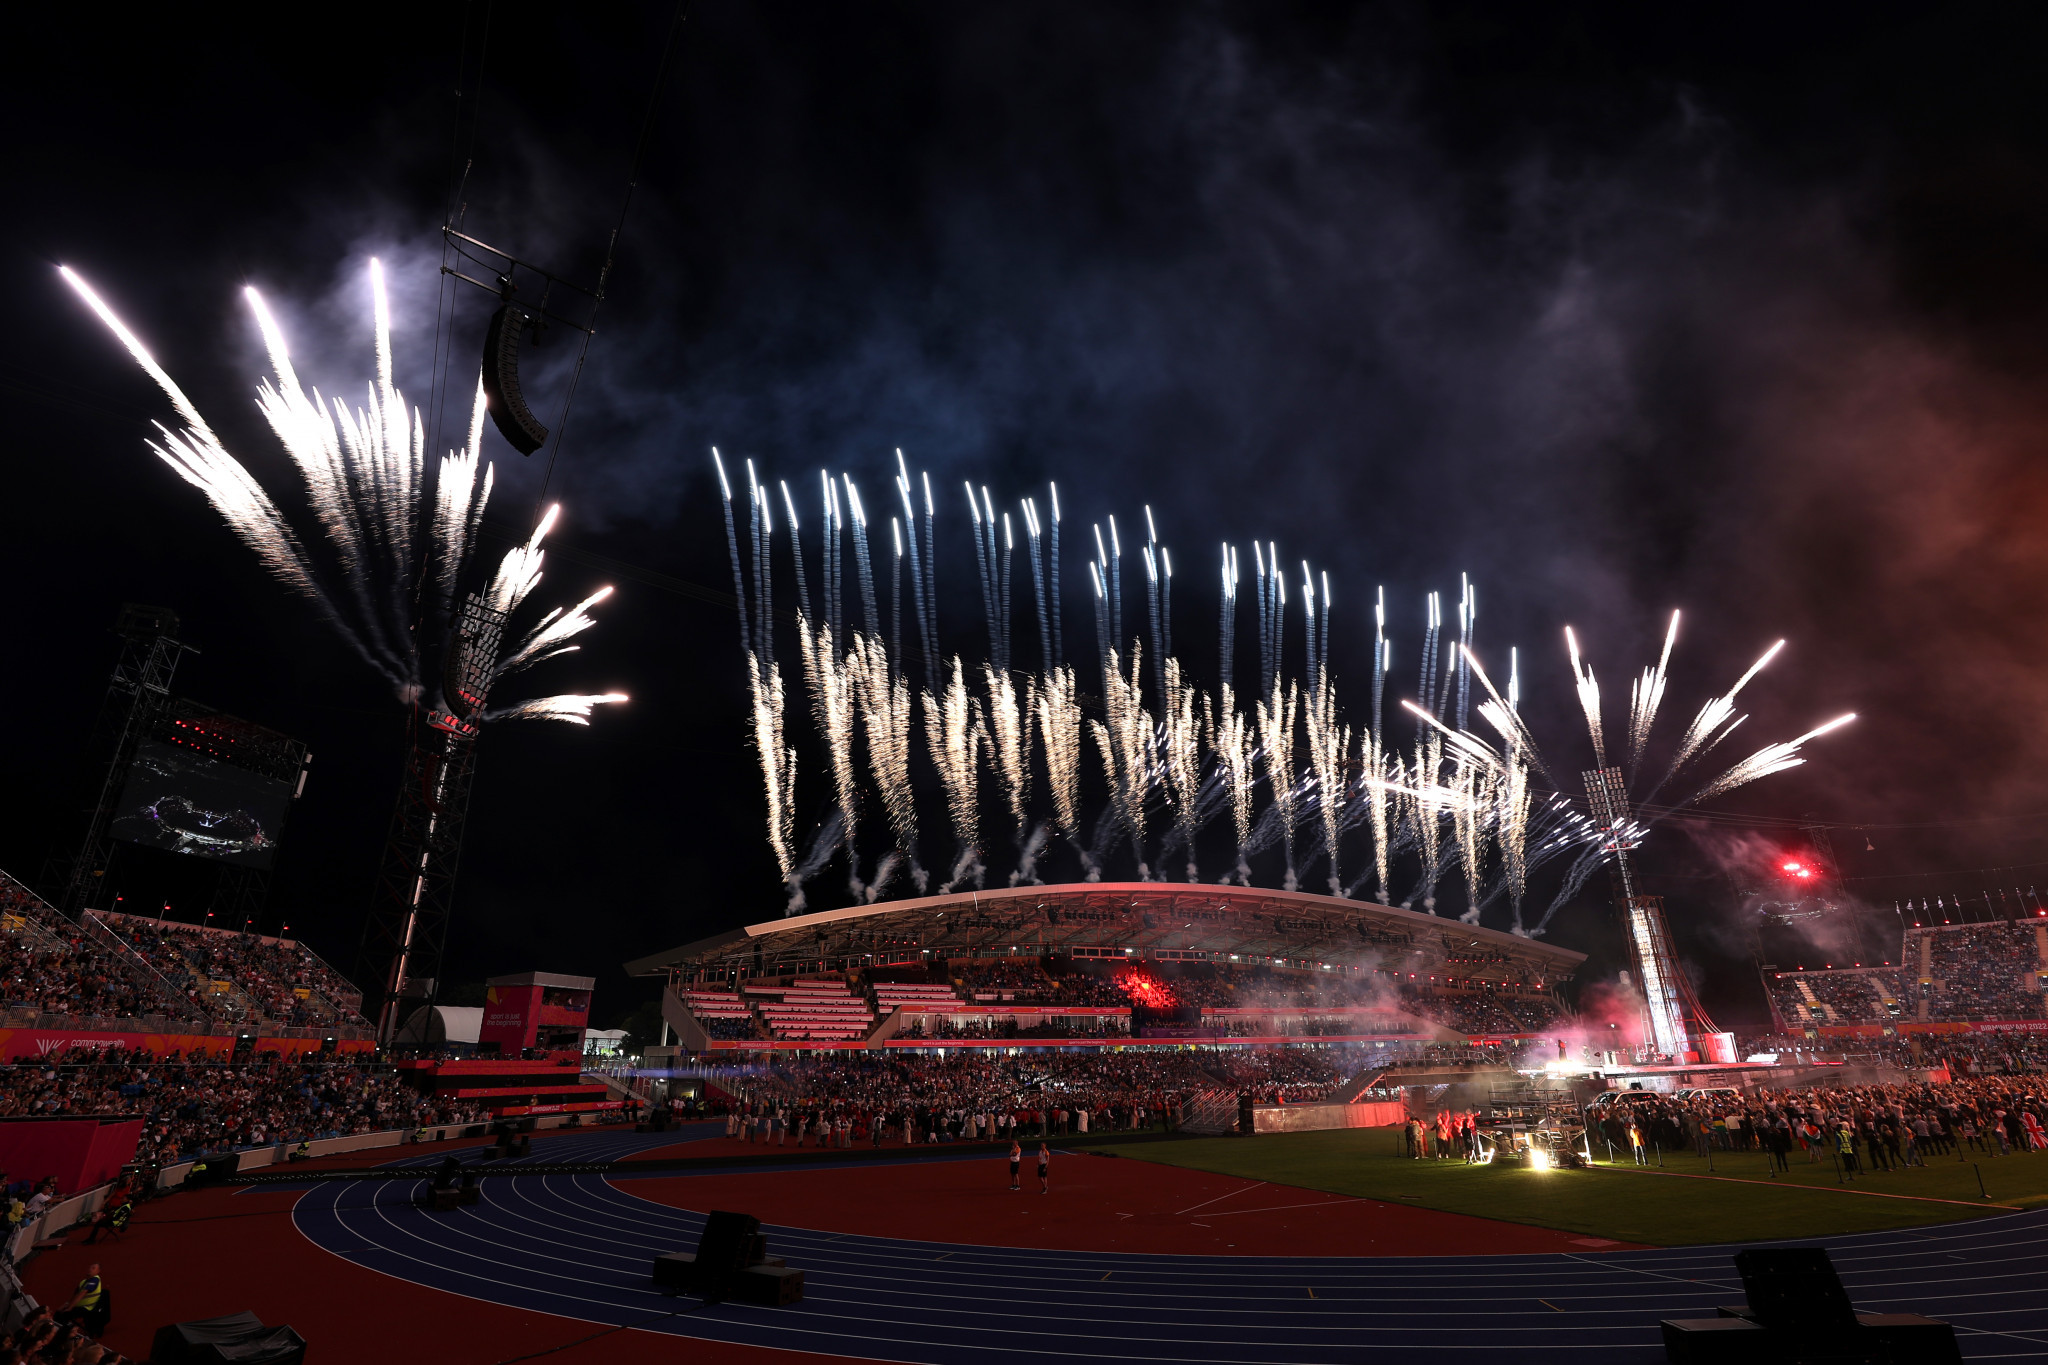 Commonwealth Games attention rose sharply during Birmingham 2022 in Australia and UK, survey finds